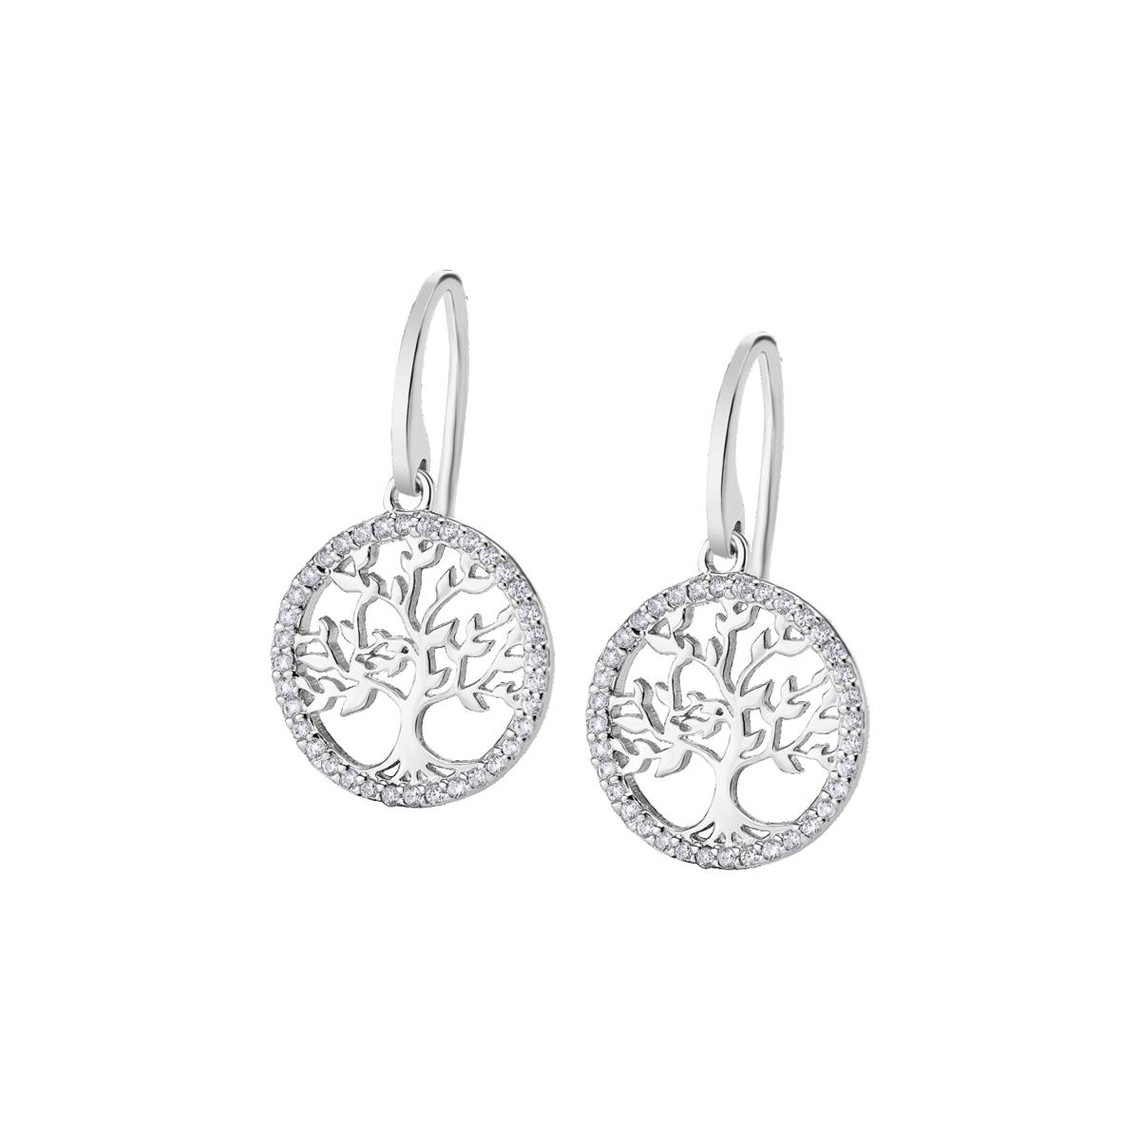 boucles d'oreilles lotus silver tree of life lp1746-4-1 - boucles d'oreilles tree of life argent lotus silver